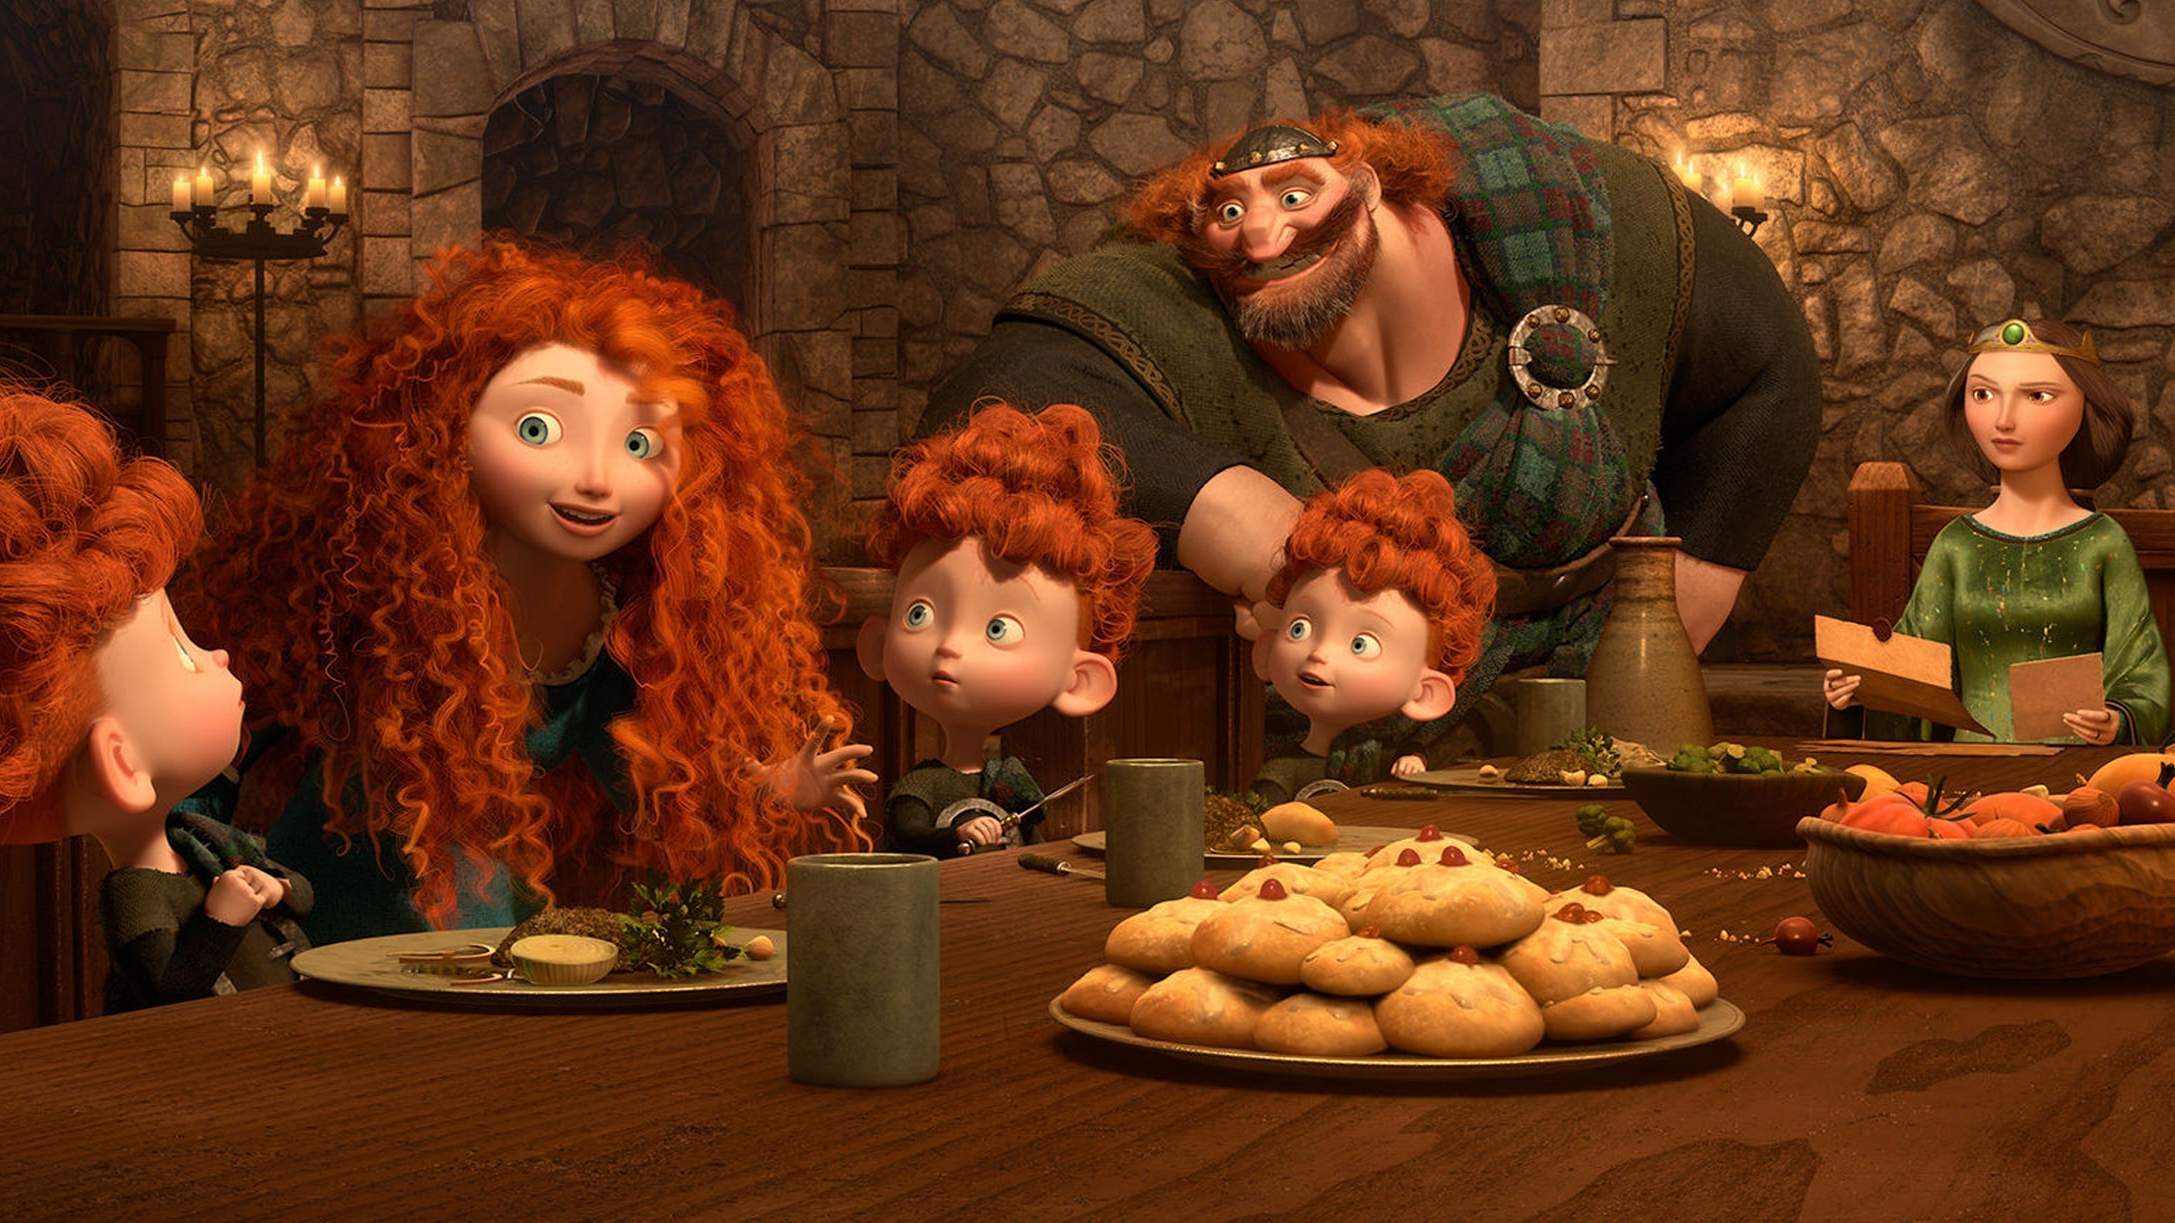 Merida telling her brothers the epic tale of her father's battle with a bear.